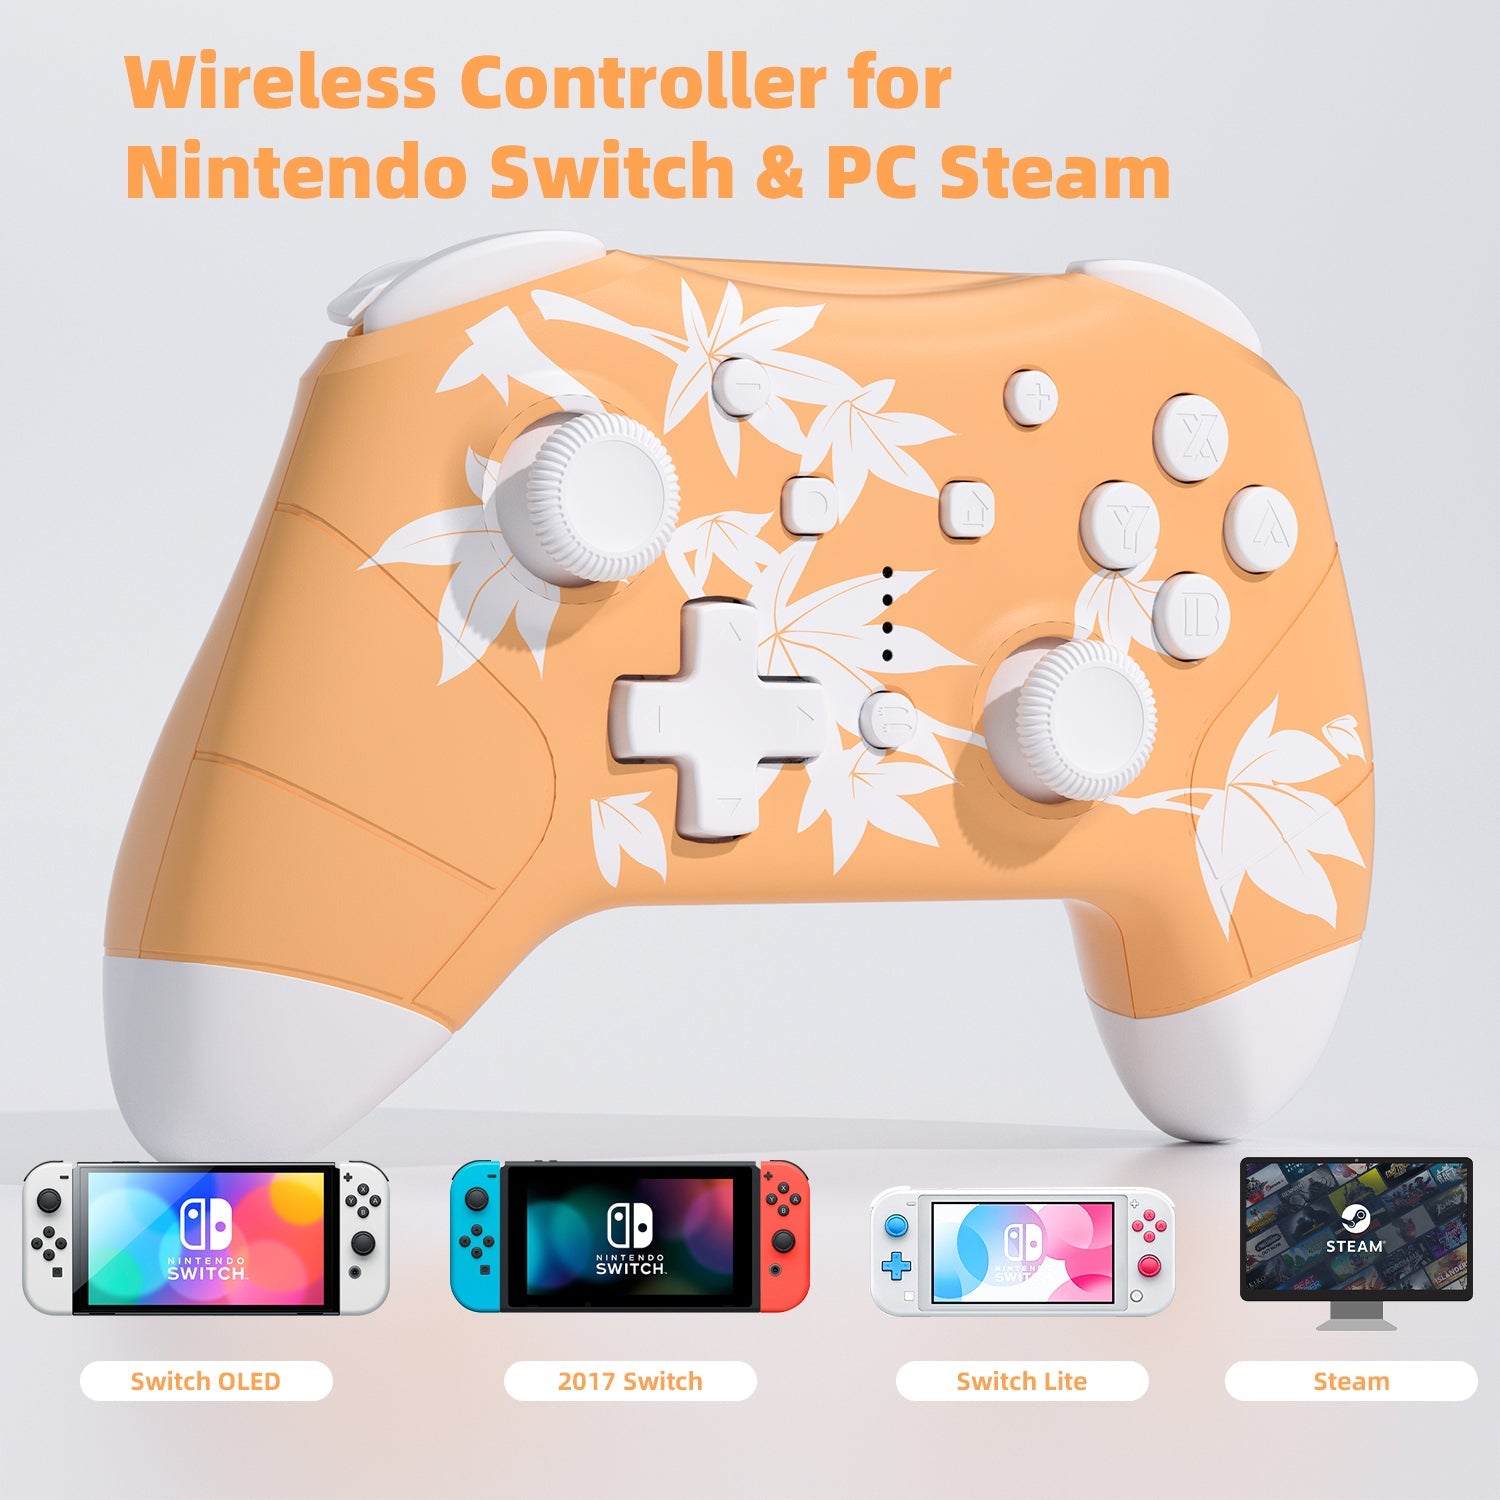 wireless controller for NS & PC STEAM